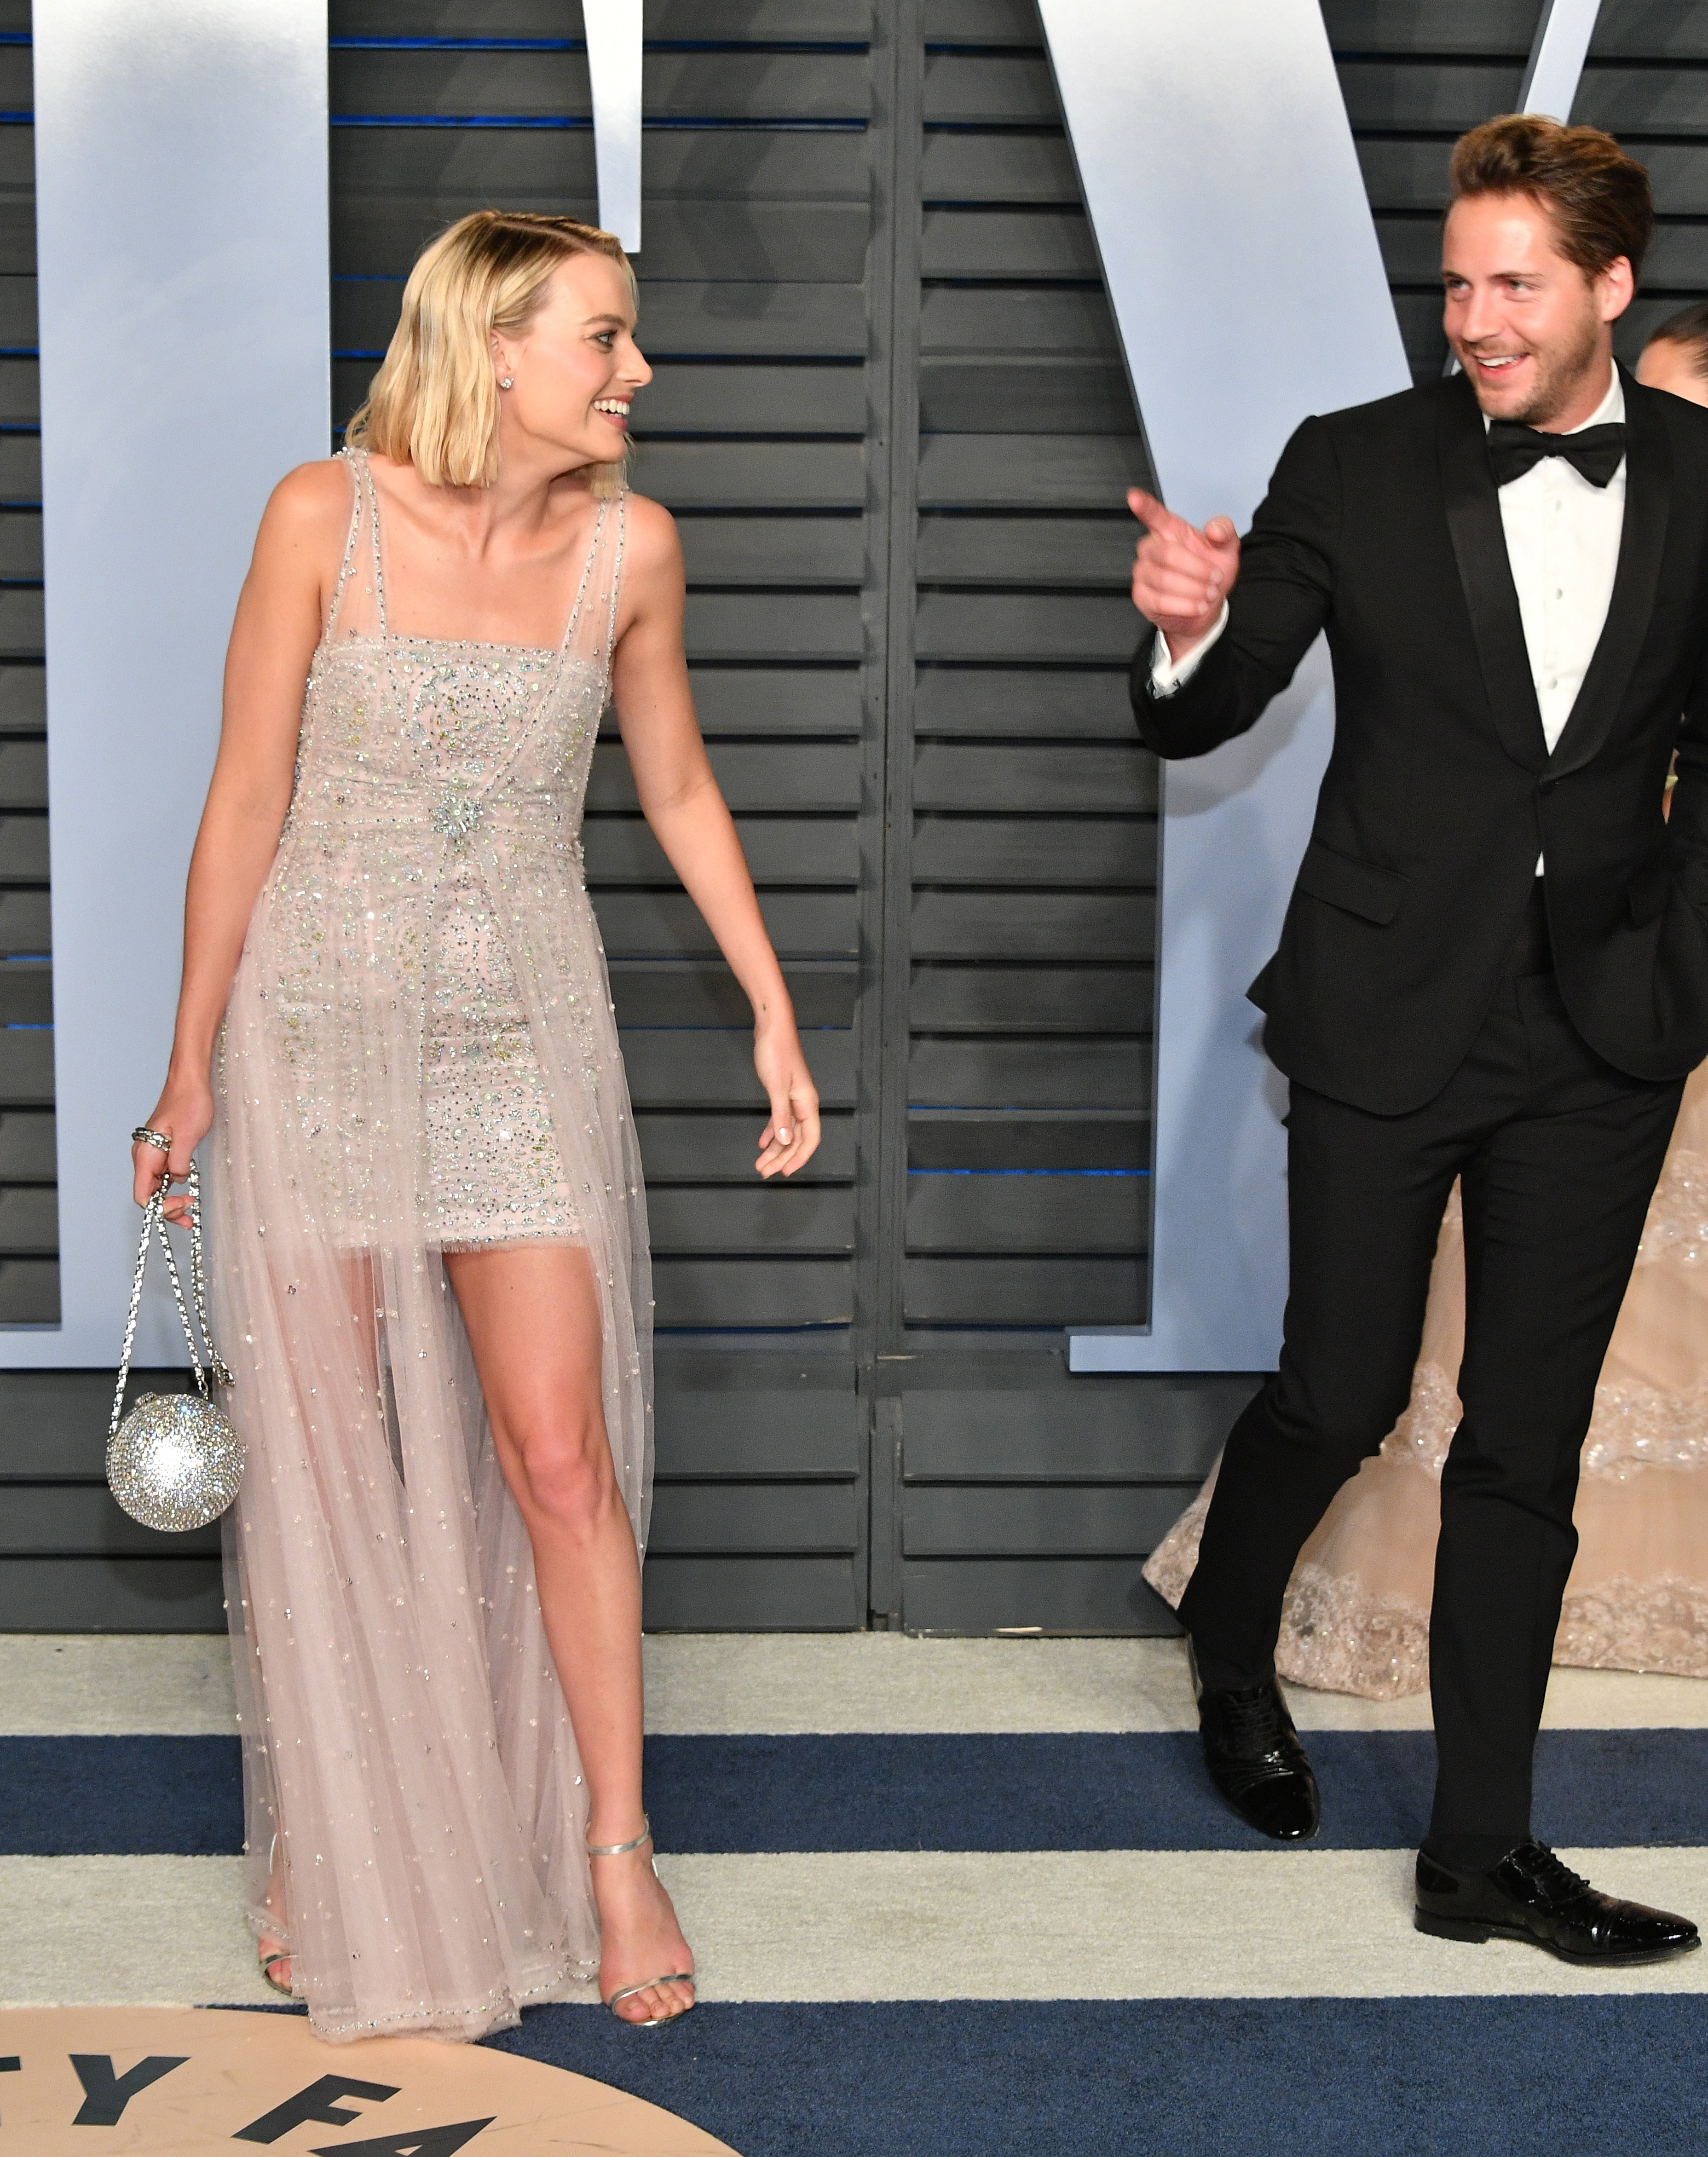 Margot Robbie and Tom Ackerley attend the 2018 Vanity Fair Oscar Party at Wallis Annenberg Center for the Performing Arts on March 4, 2018 in Beverly Hills, California. | Source: Getty Images